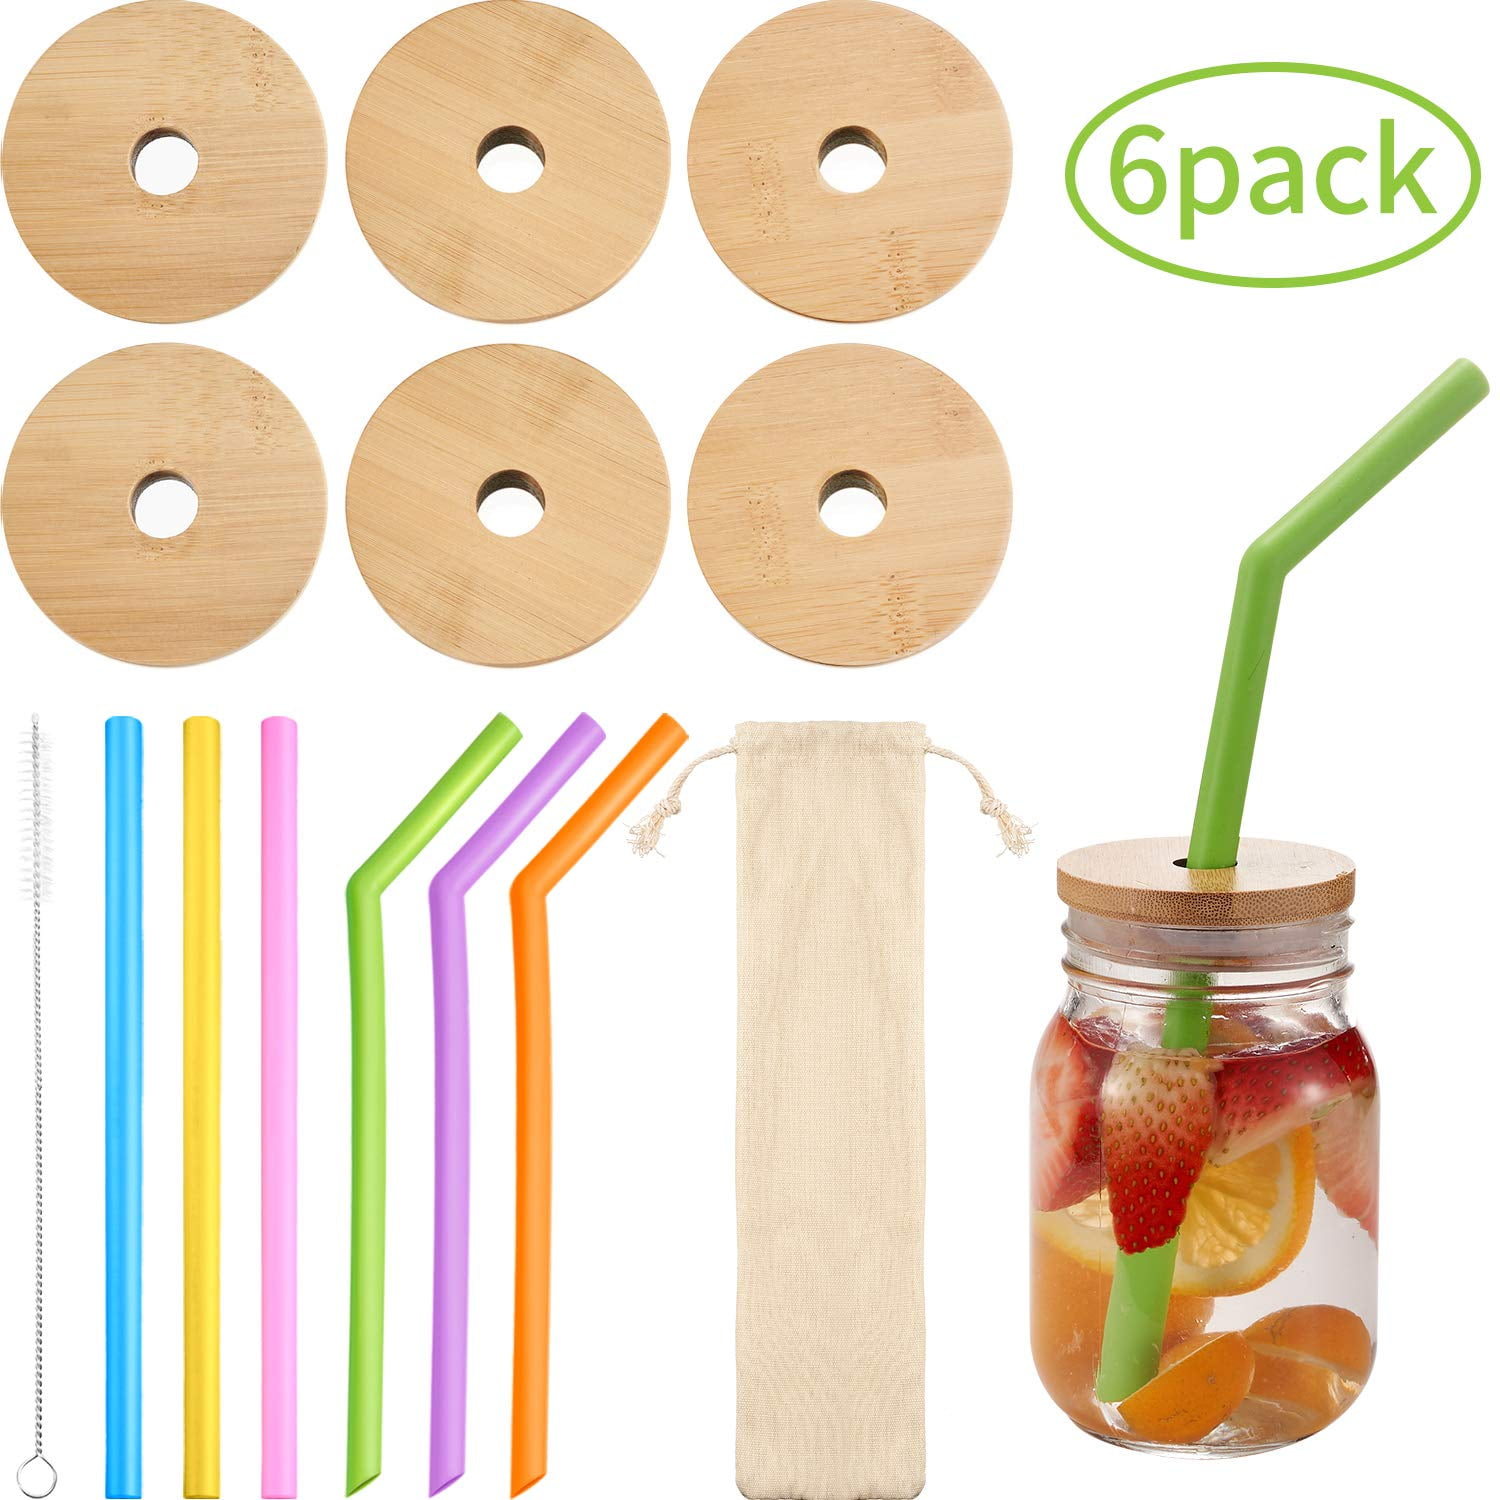 Silicone Straws Elk and Friends Wide Mouth Mason Jars Straw Lids Cleaning Brush Great for Kids & Adult Drinks Plastic Lids with Straw Hole No Rust BPA Free 4 Pack Reusable